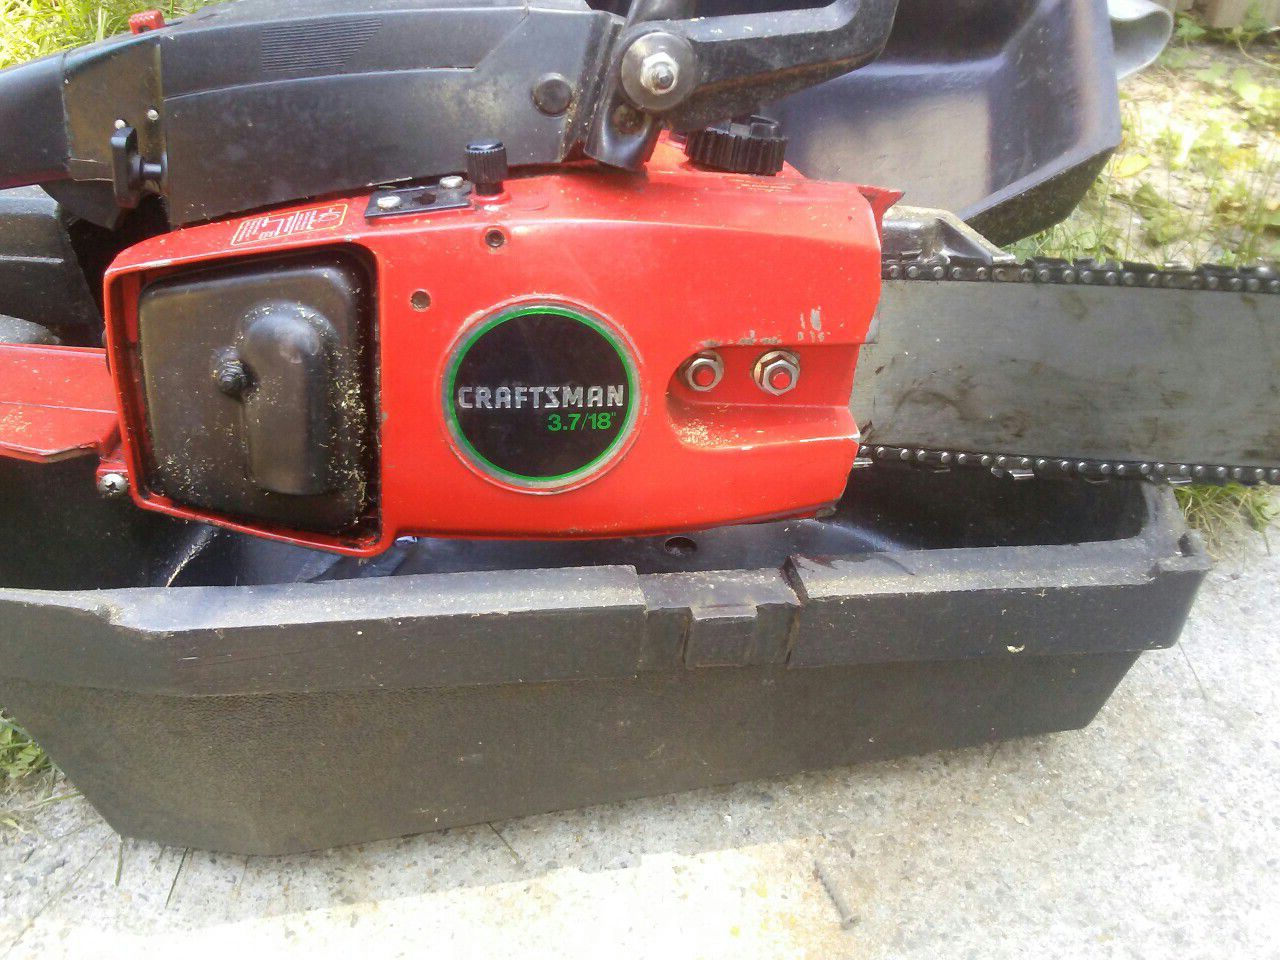 Craftsman 18 in commercial chainsaw.